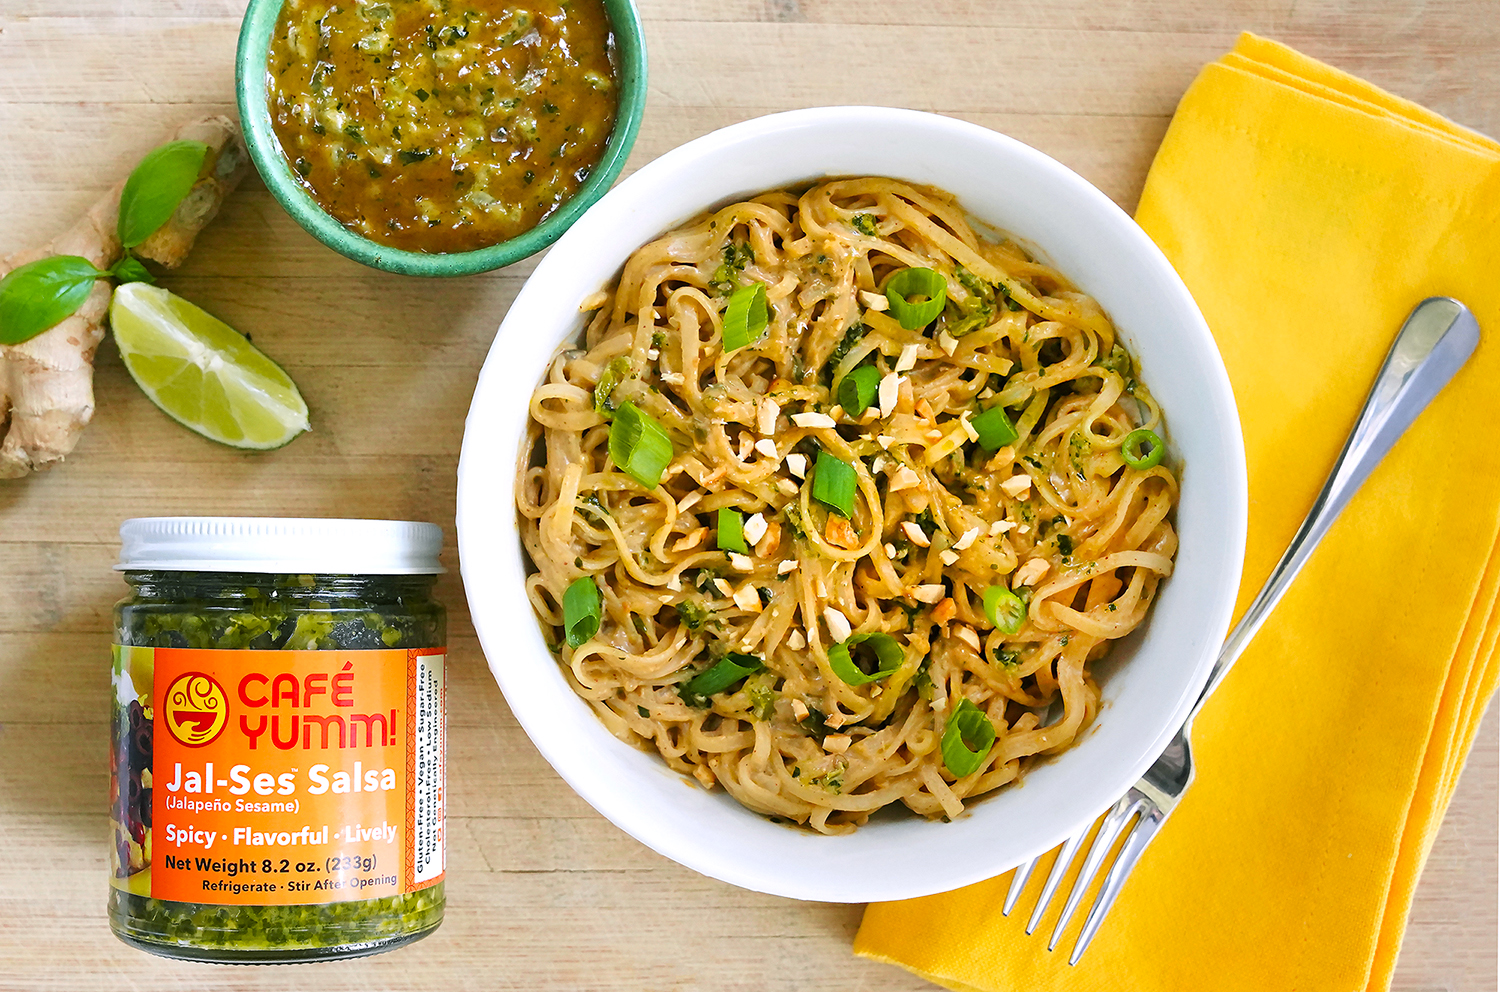 Spicy Peanut Noodles with Yumm! Jal-Ses Salsa